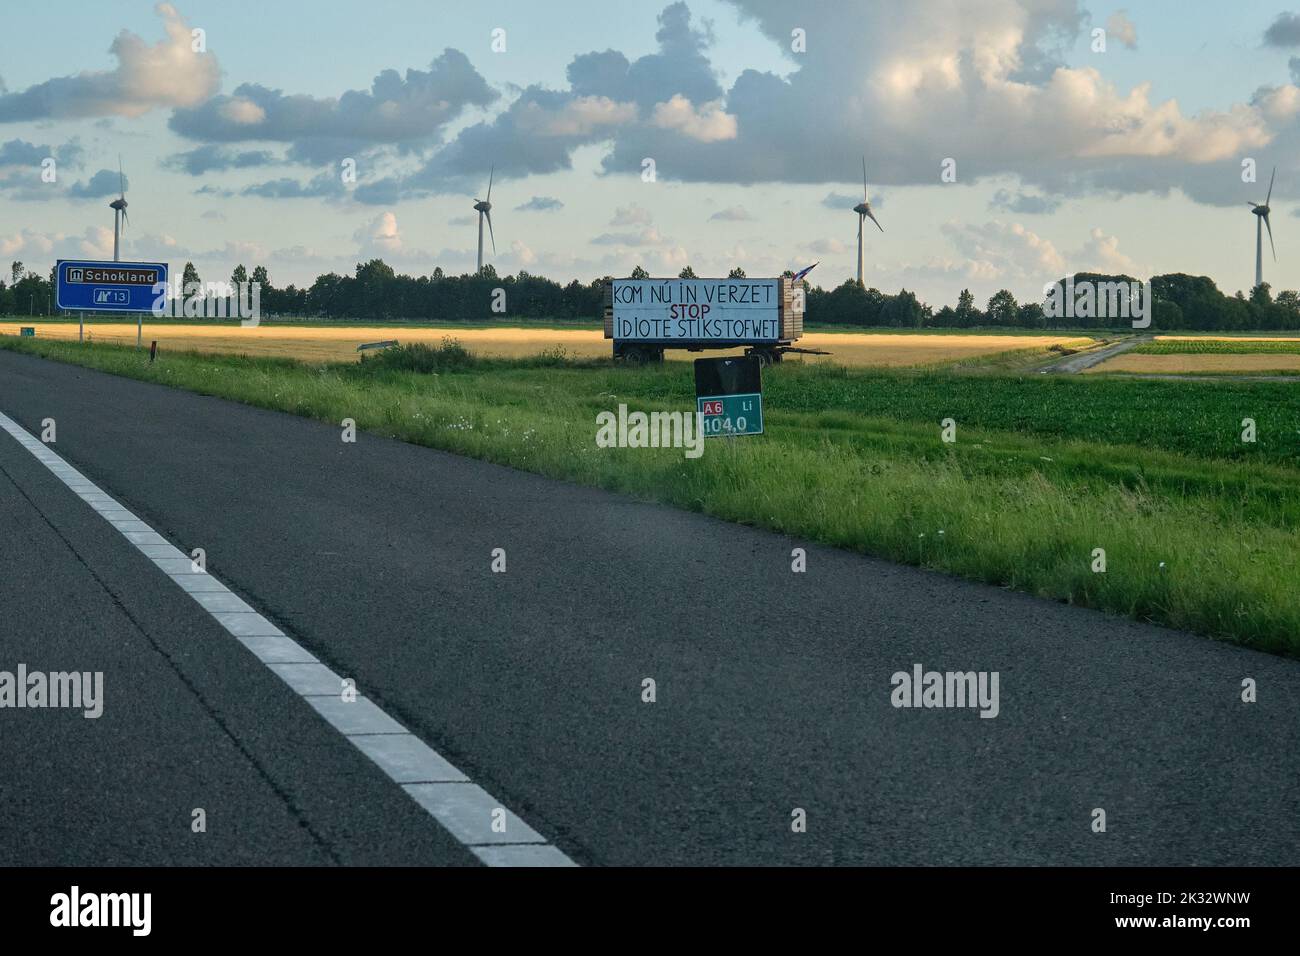 Banner next to highway with text 'Now resist, stop idiotic nitrogen law' Dutch farmers protest against the plans of the government forced shrinking of Stock Photo